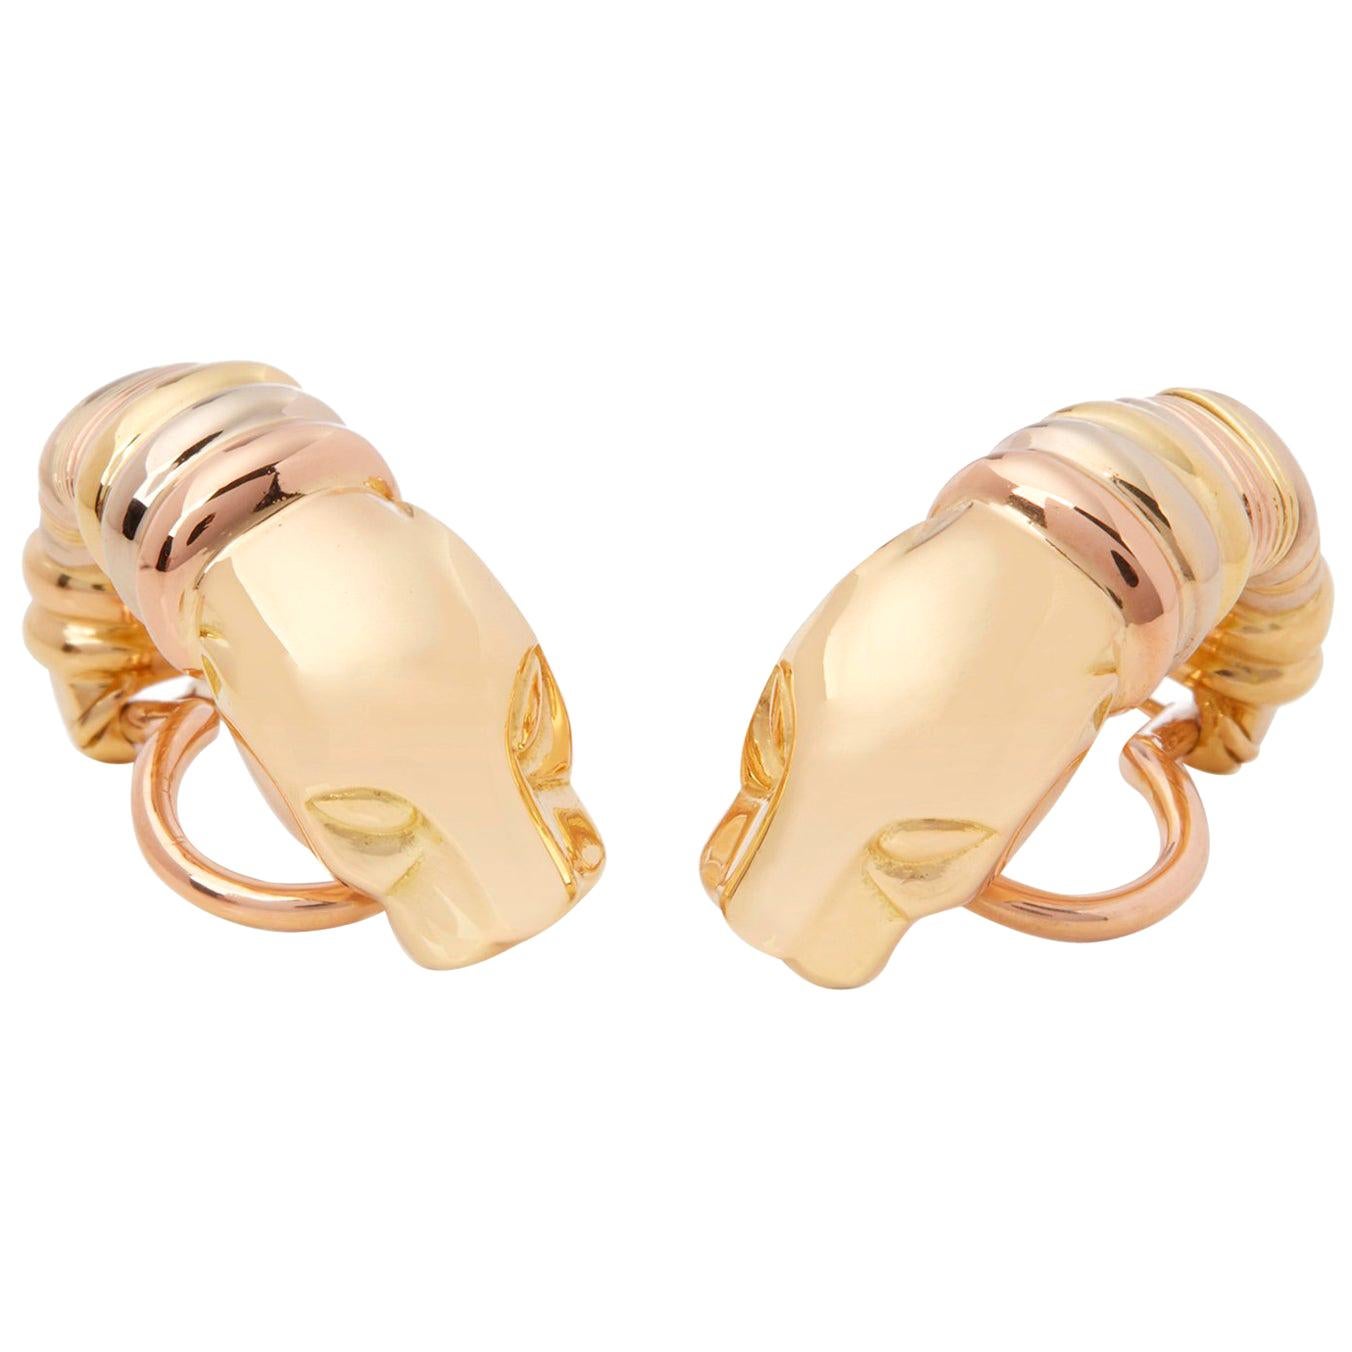 Cartier 18 Karat Yellow, White and Rose Gold Panthère Earrings